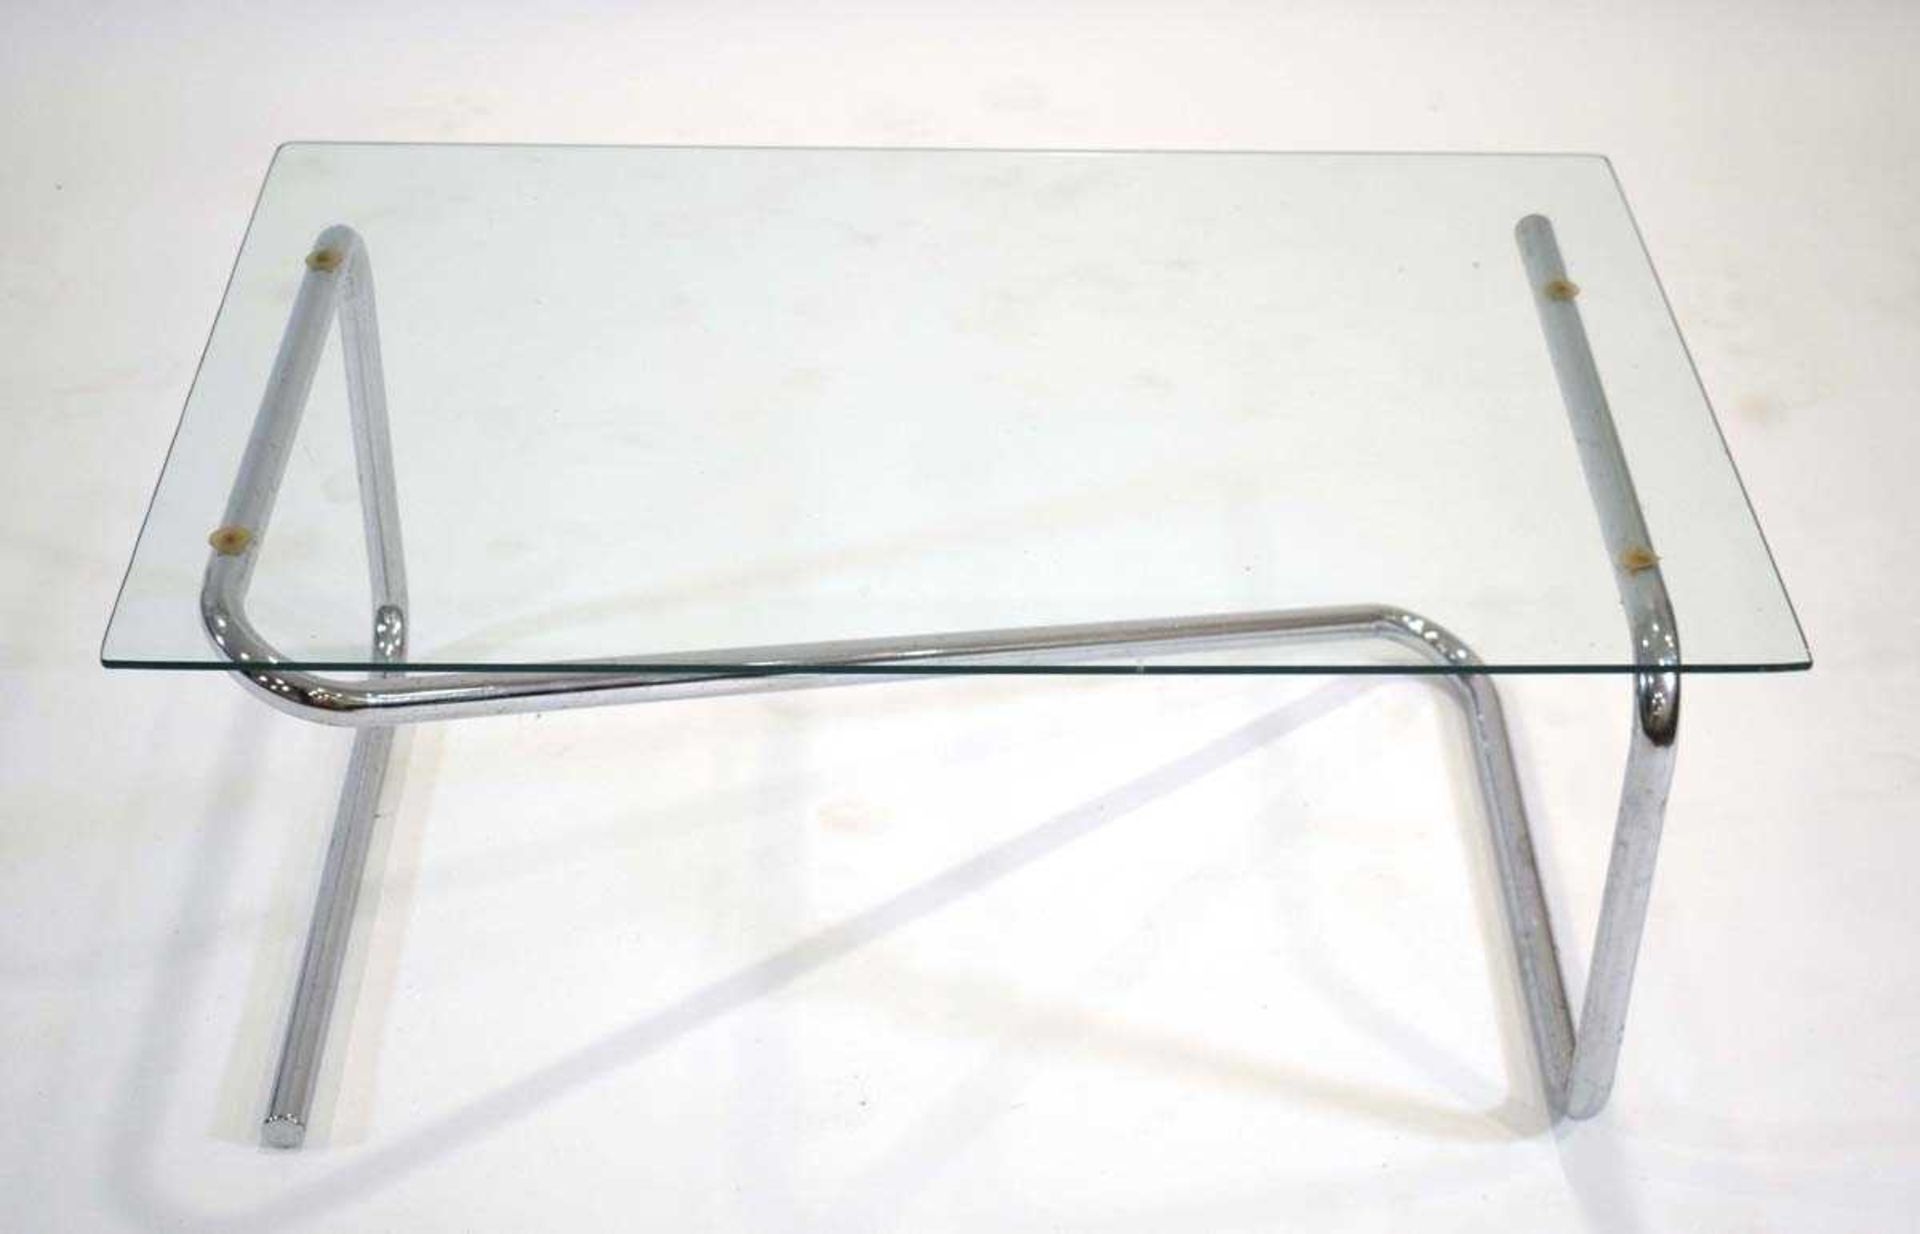 A 1980's chromed tubular coffee table of Z-form with a rectangular glass surface, 89 x 59 cm - Image 3 of 3